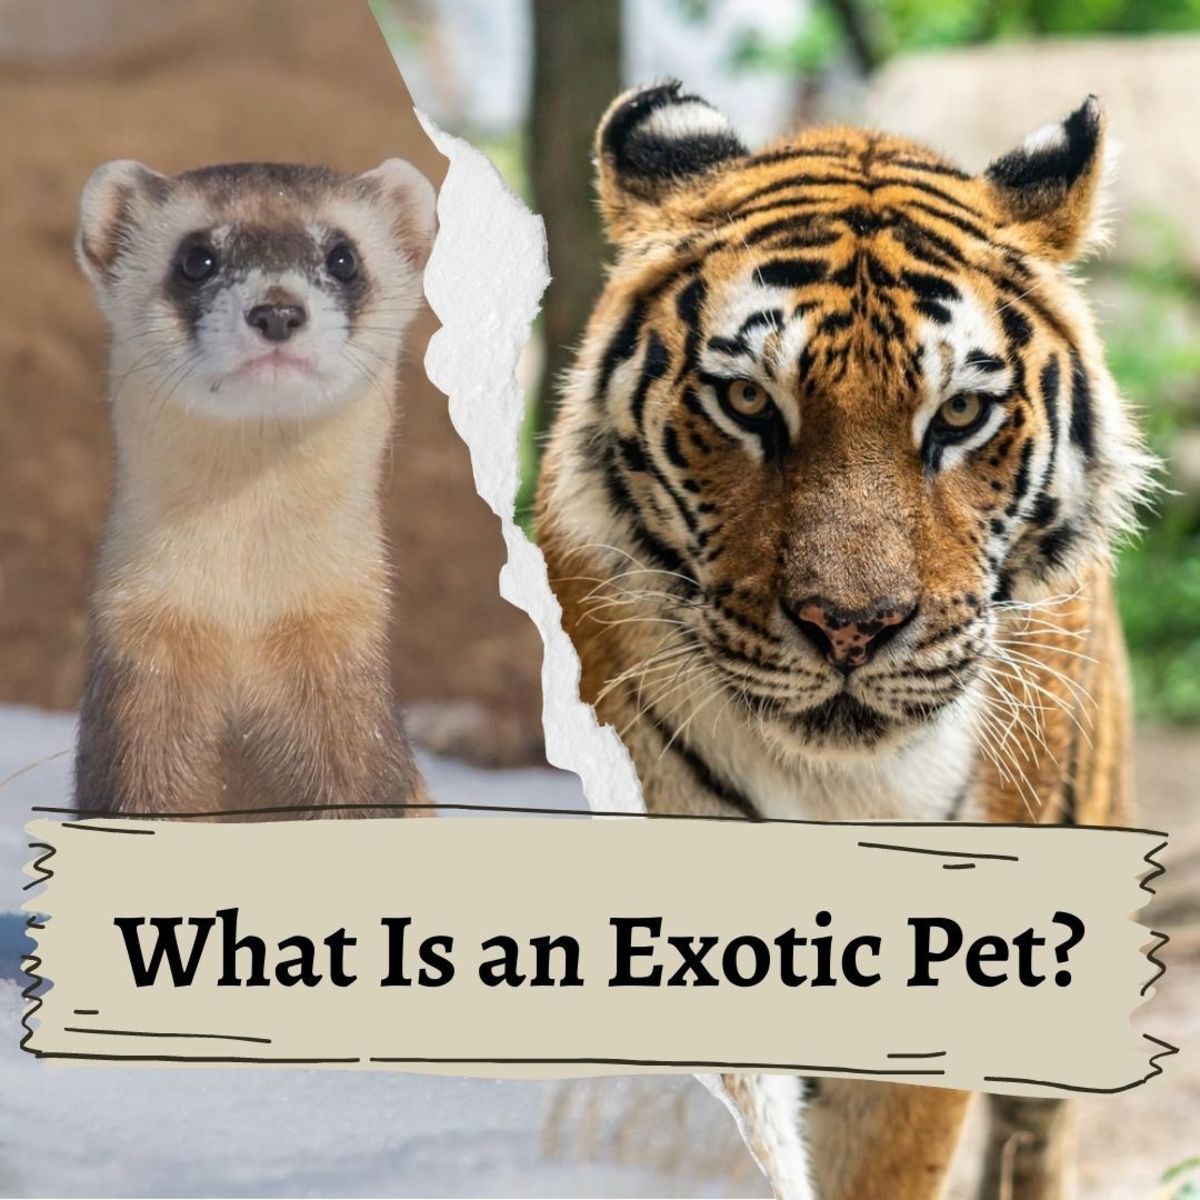 What Is an Exotic Pet?